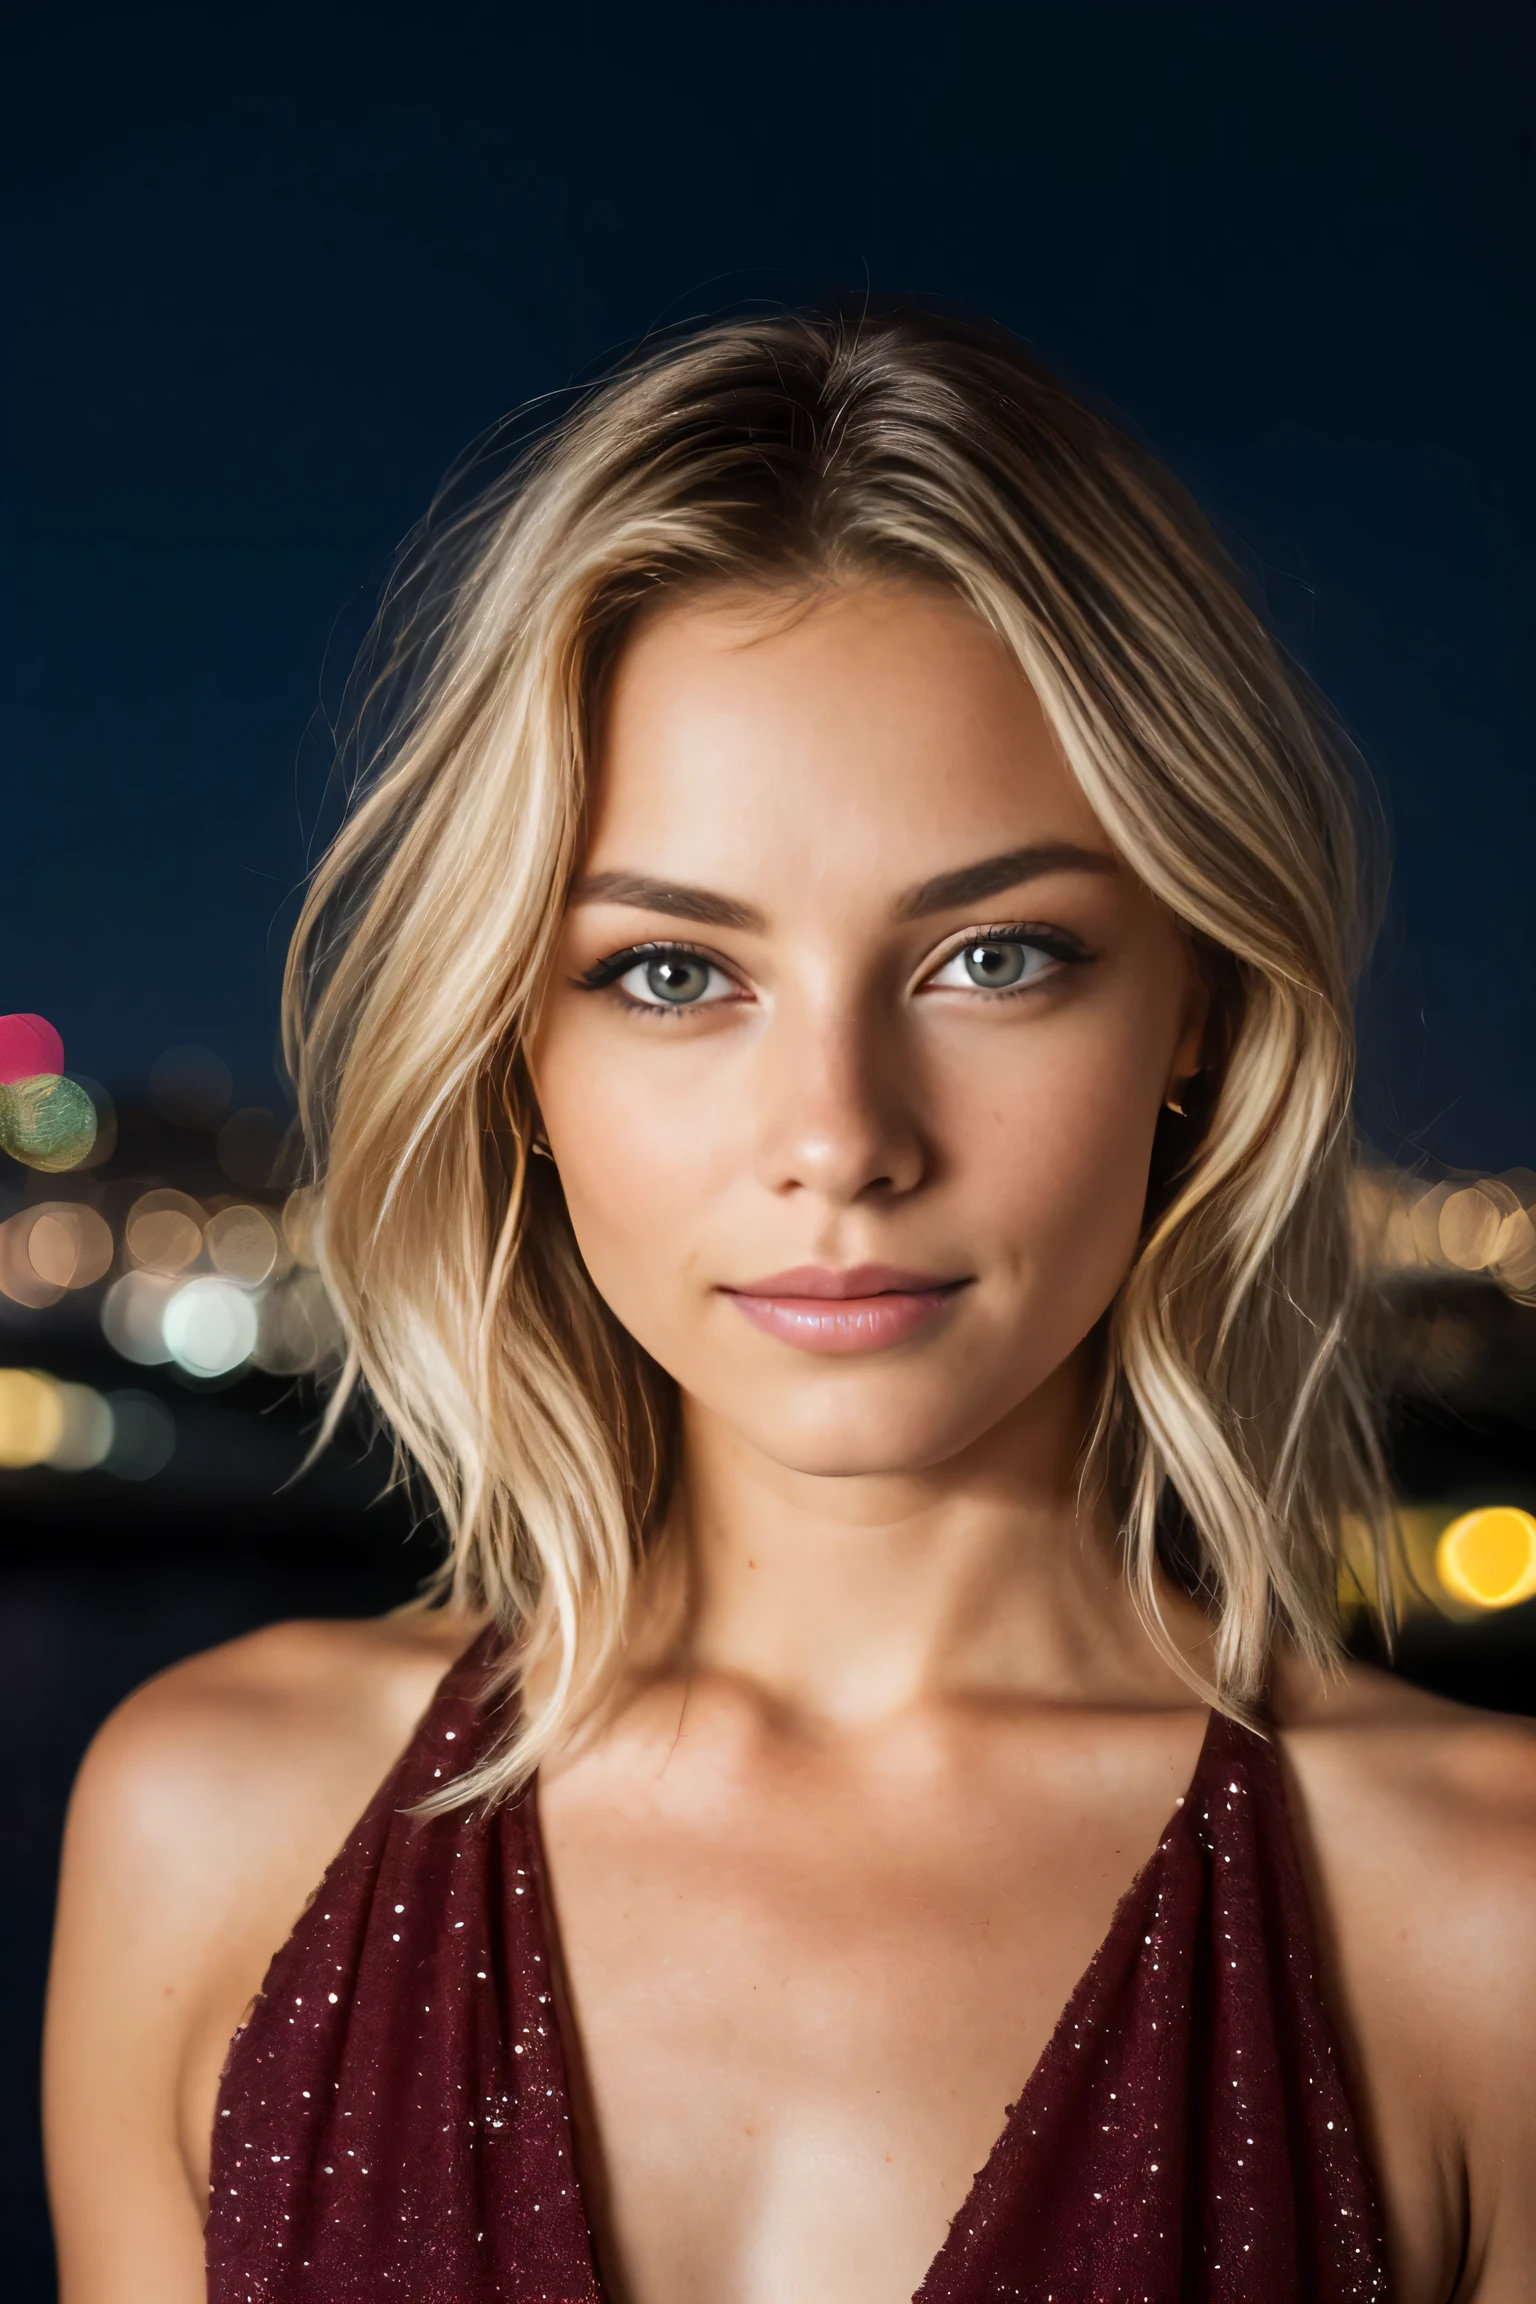 RAW uhd closeup portrait of a 24-year-old blonde, natural blonde hair, locks, wavy, (brown-eyed woman) in an apartment, new york background, night starry sky, ,breasts naturai, city night background, (red summer dress), (neckline), detailed (textures!, hair!, brightness, color!, imperfections:1.1), highly detailed bright eyes, (looking at the camera),  specular lighting, dslr, ultra quality, sharp focus, sharp, dof, film grain, (centered), Fujifilm XT3, crystal clear, center of frame, cute face, sharp focus, light pole, neon lights, bokeh, (dimly lit), low key, at night, (night sky)